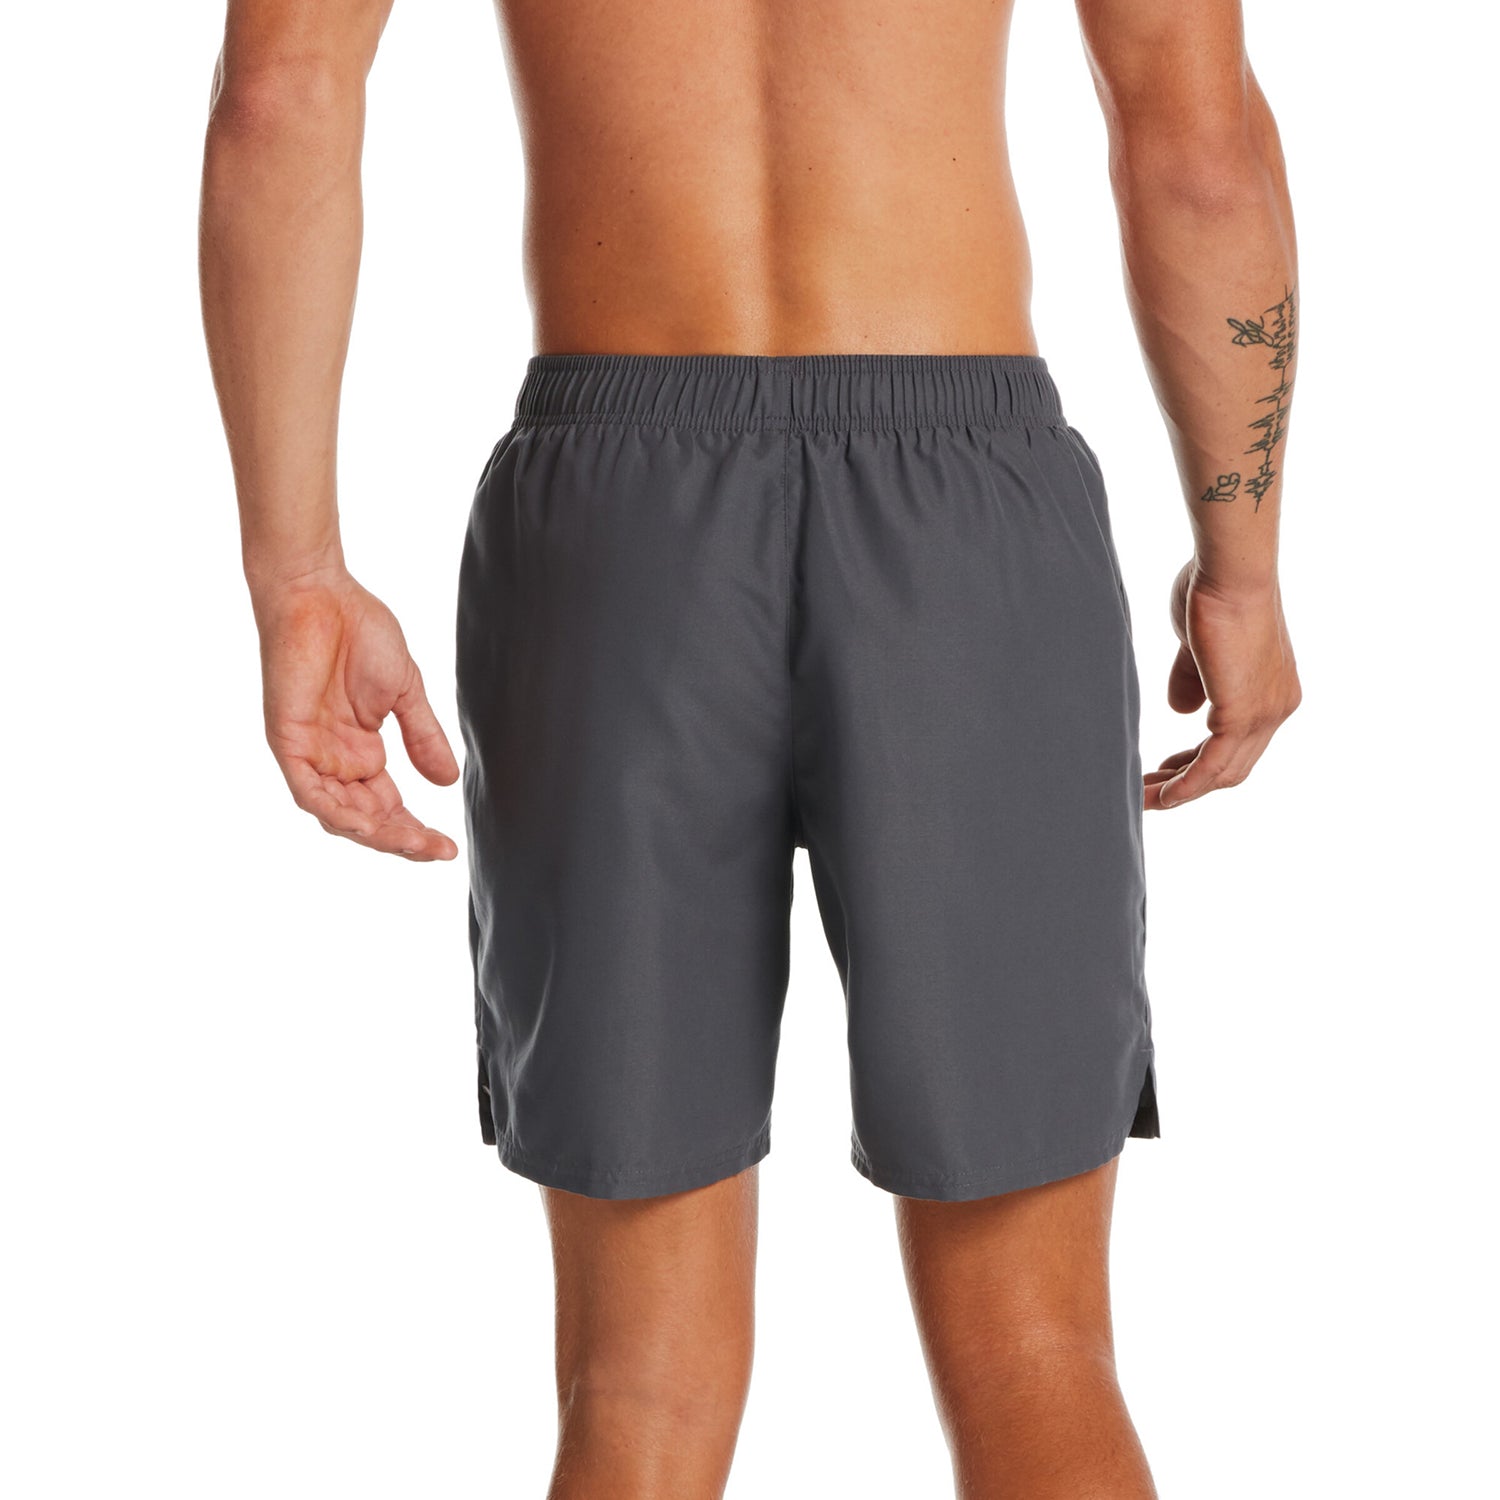 Nike Solid Lap 9 Inch Volley Short Swim Trunk Mens Style : Nessa558